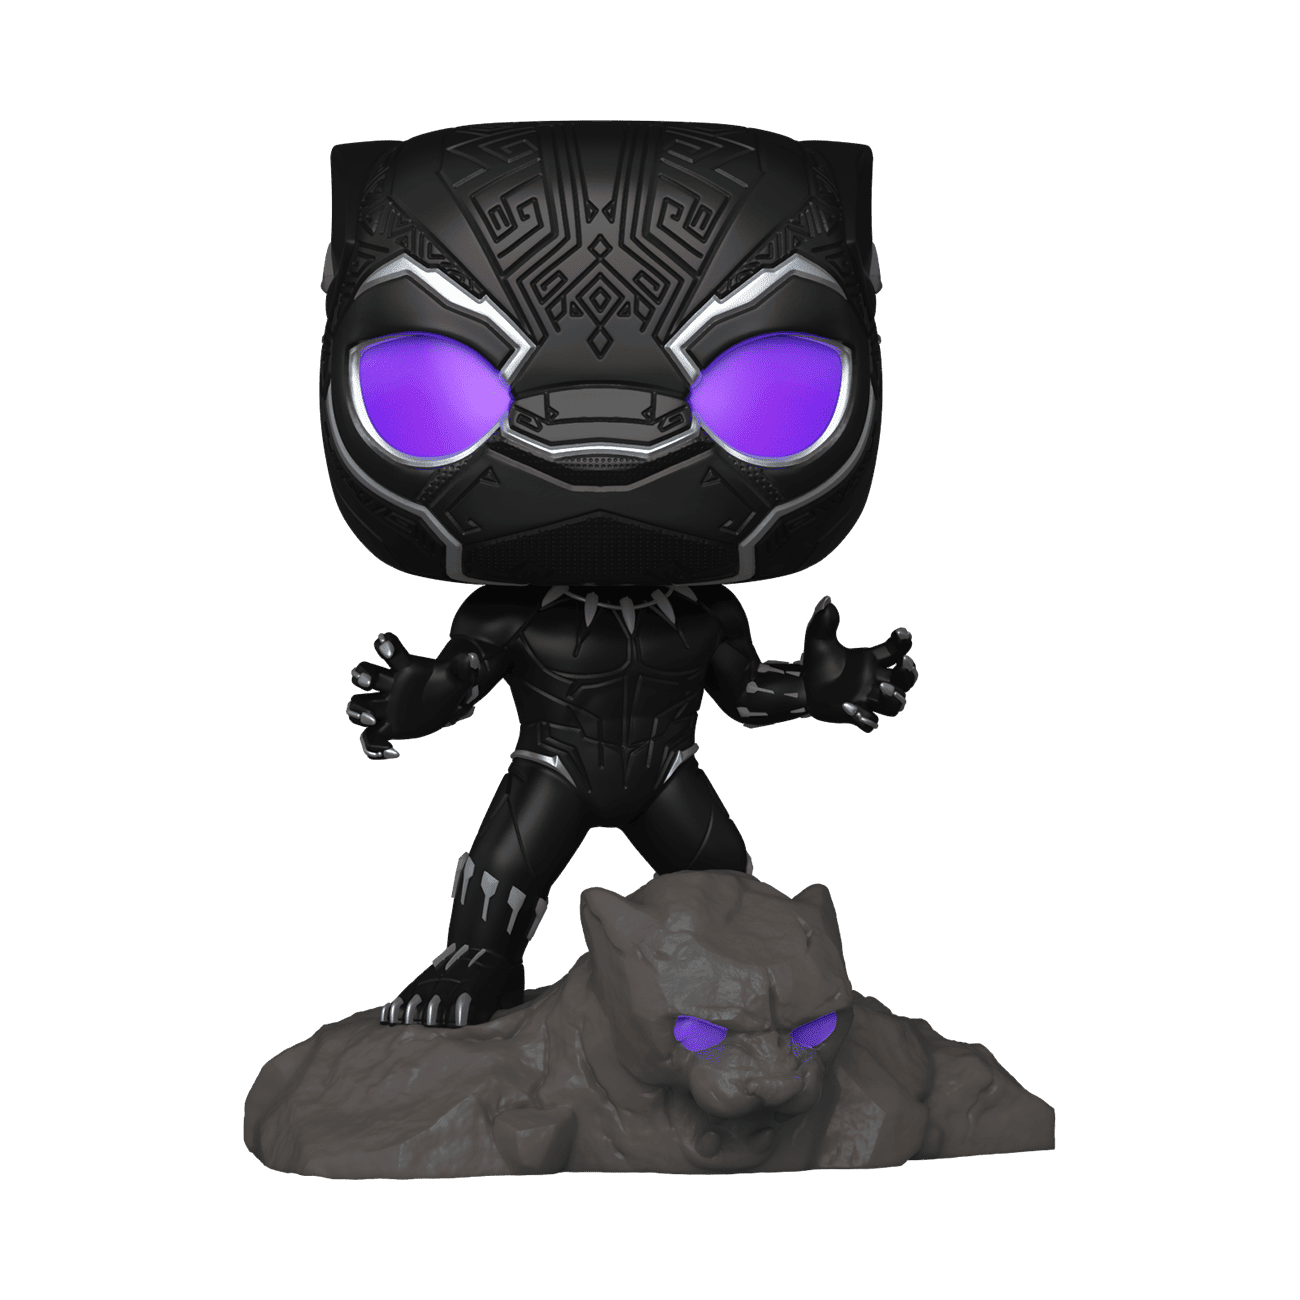 Buy Pop! Lights and Sounds Black Panther at Funko.